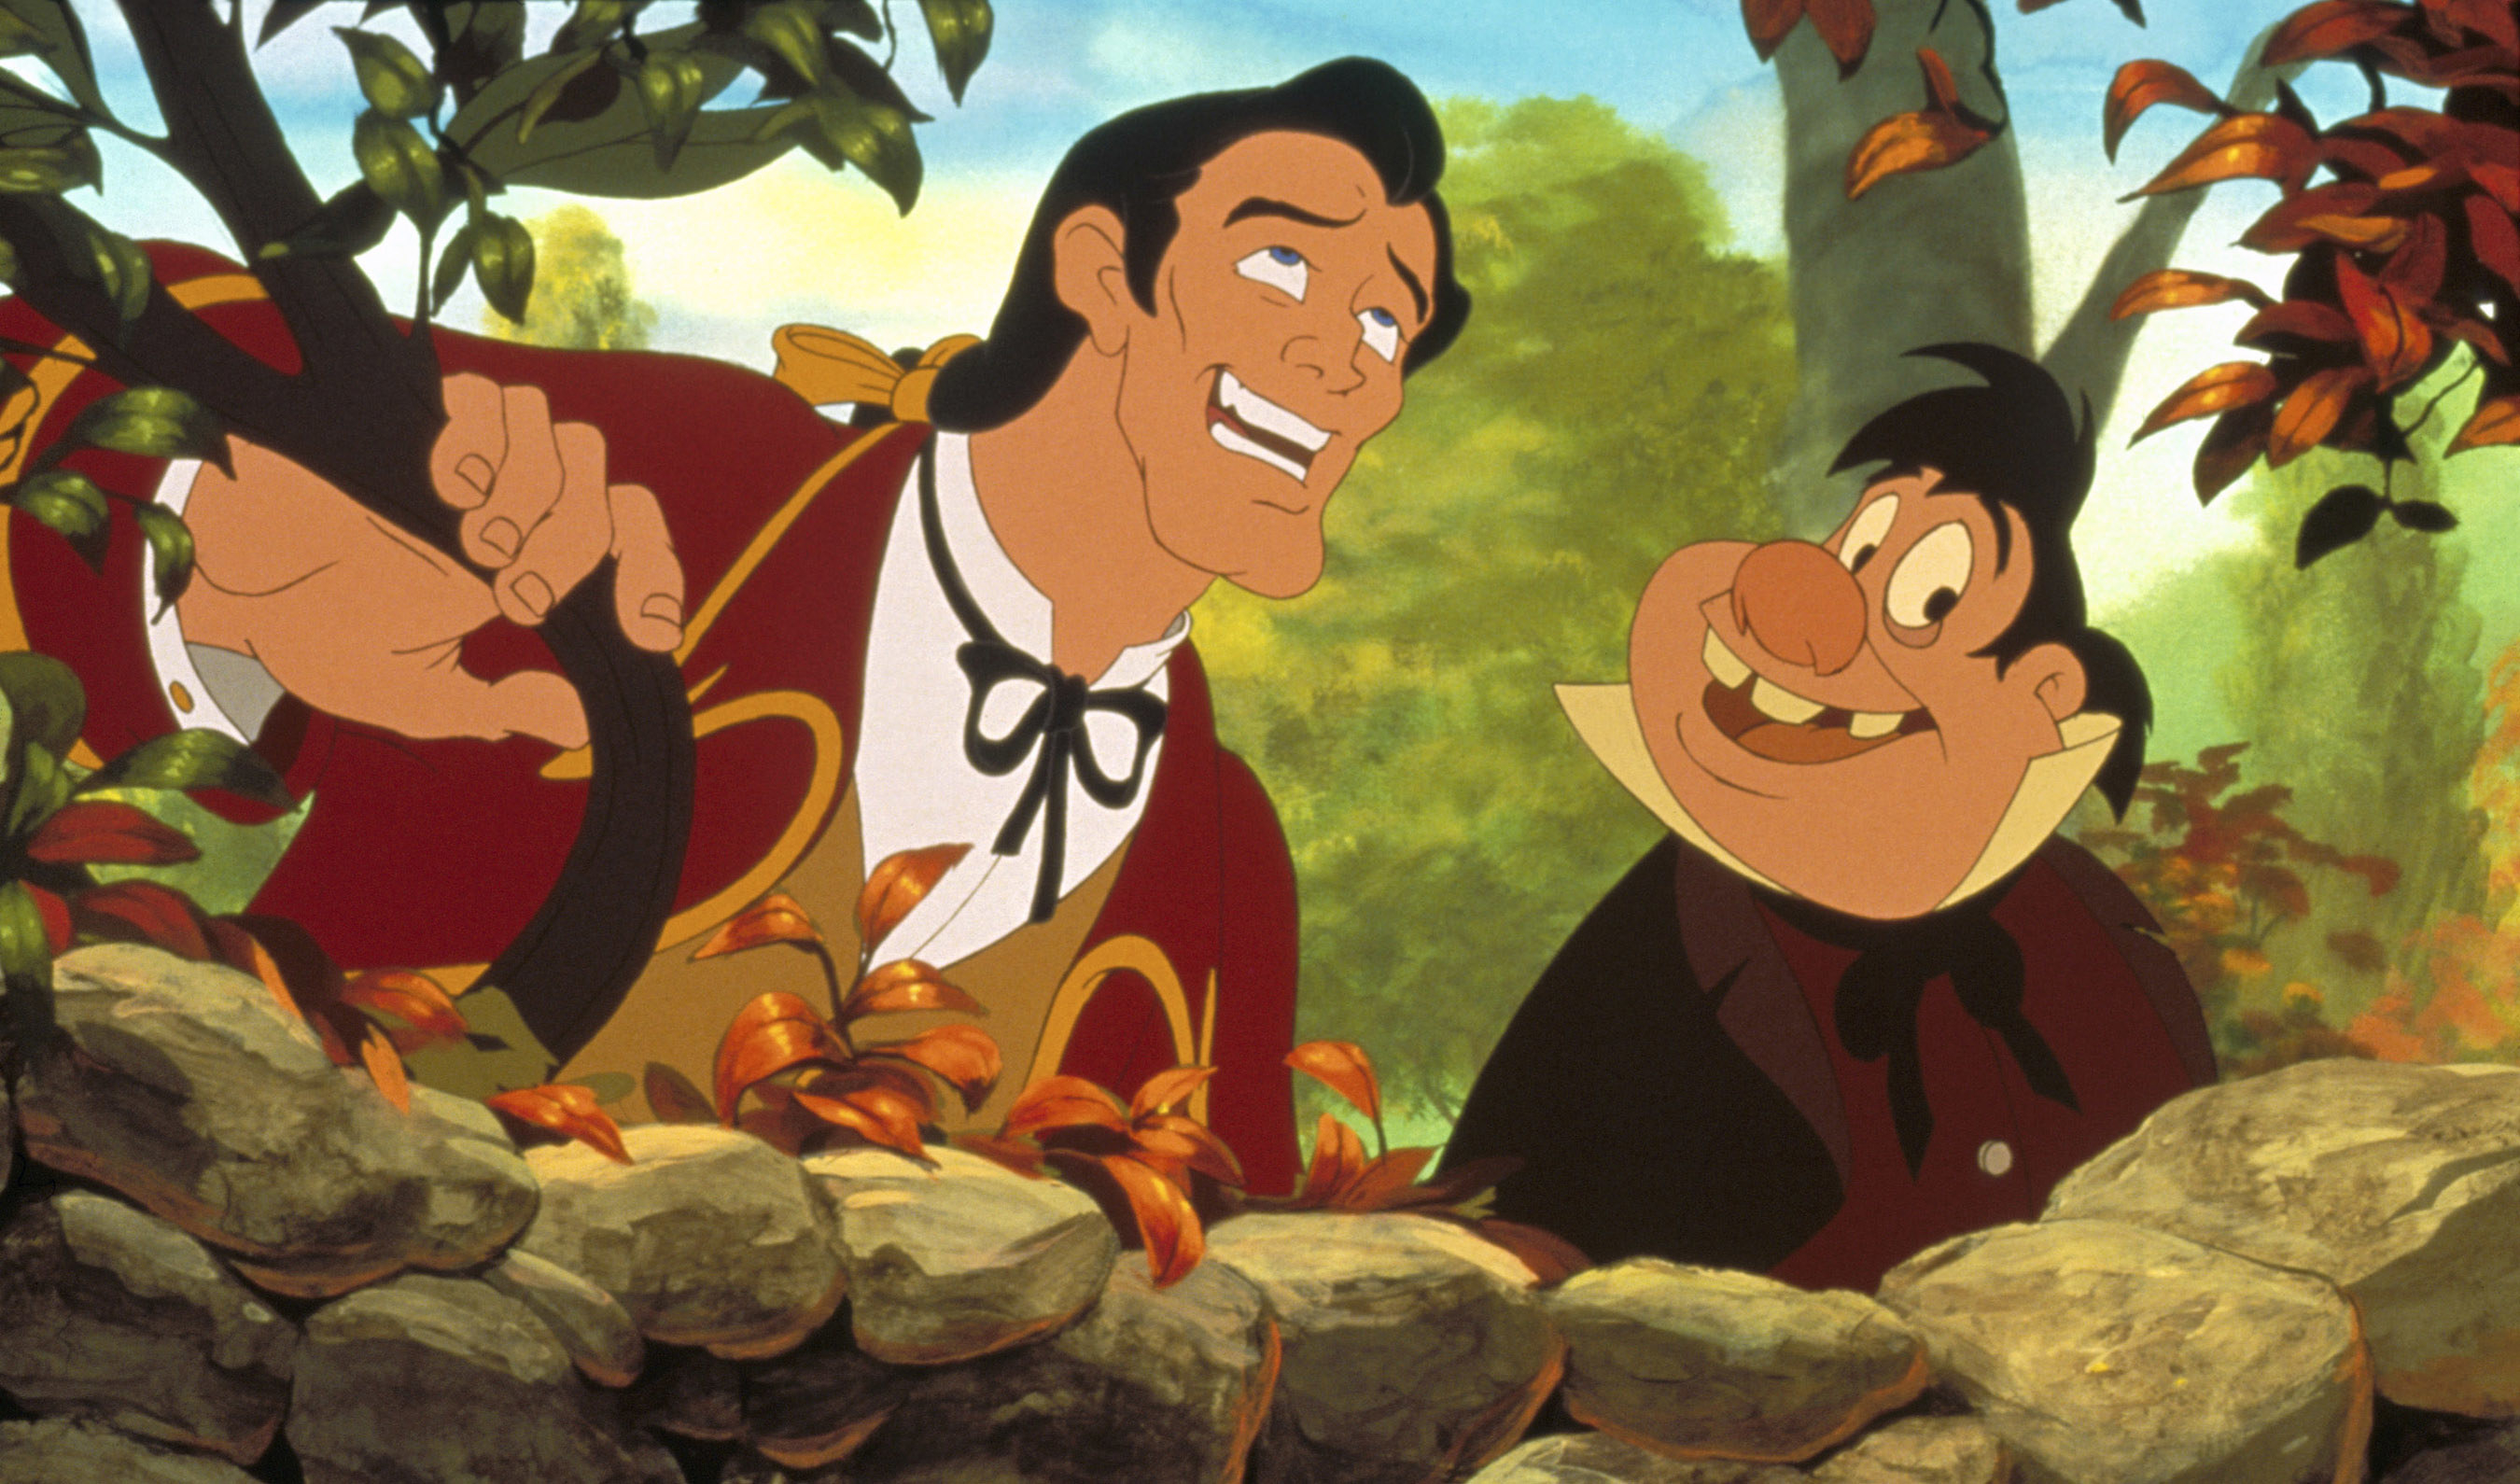 Gaston and LeFou in the animated version of Beauty and the Beast